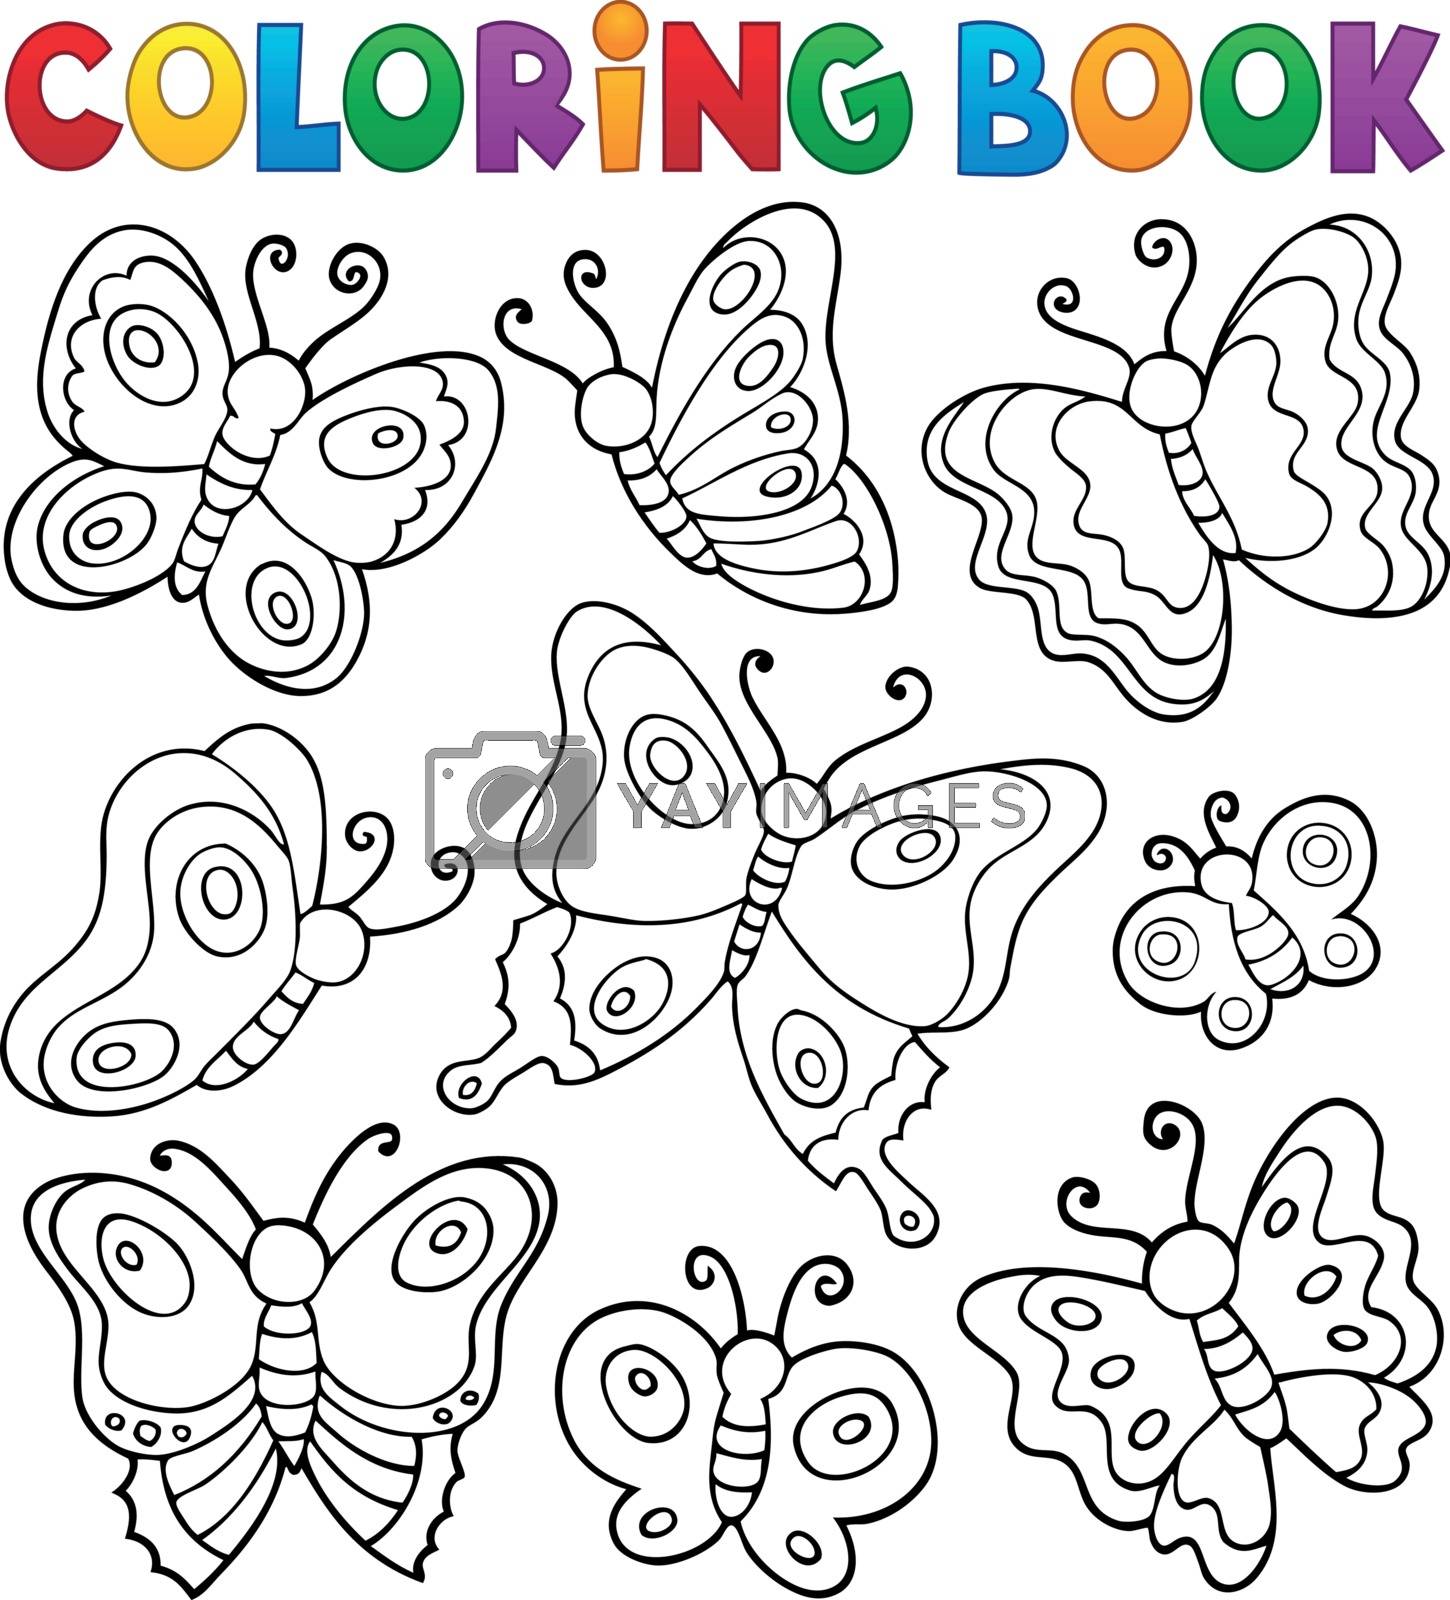 Royalty free image of Coloring book various butterflies theme 1 by clairev